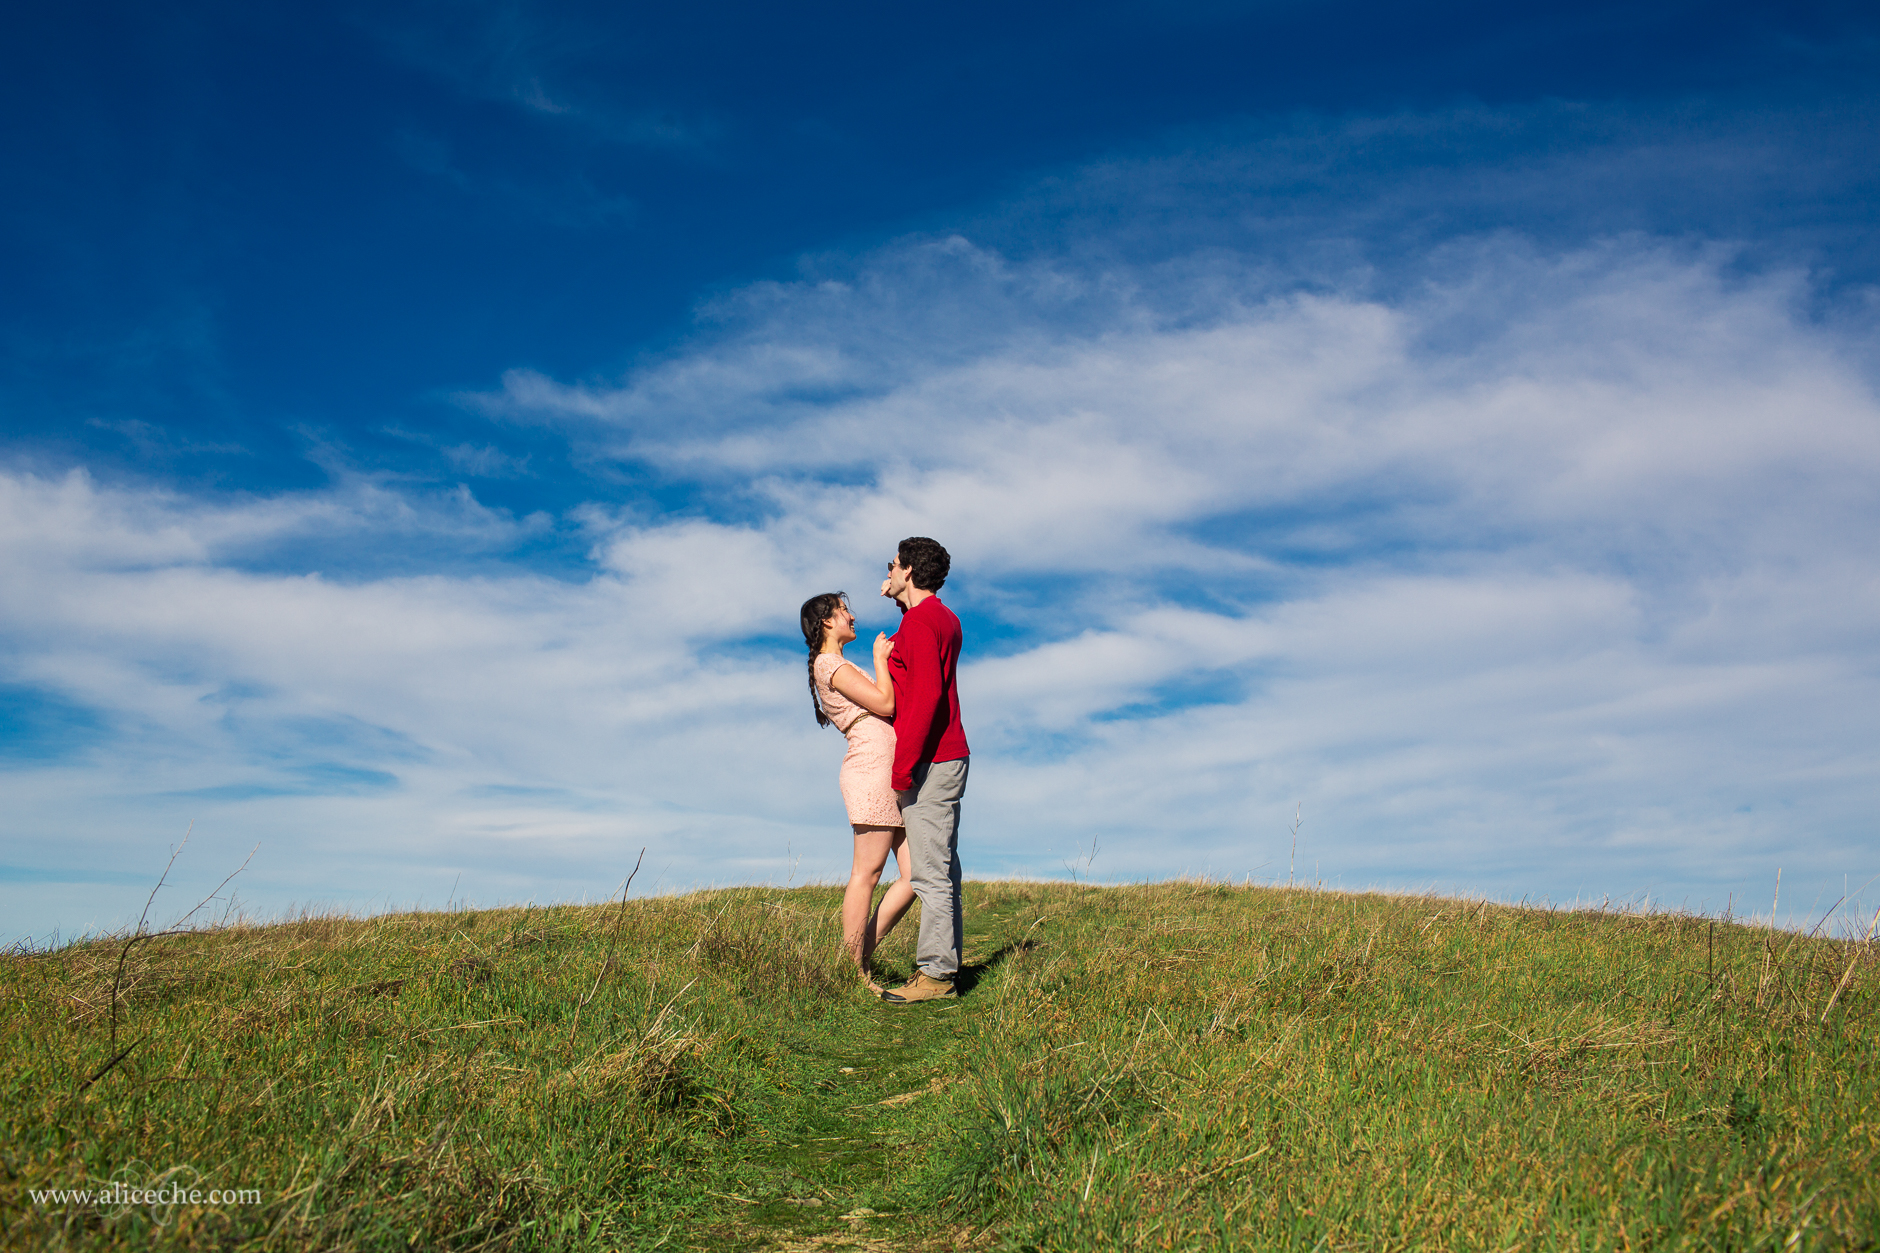 alice-che-photography-russian-ridge-picnic-bay-area-engagement-photographer-silly-guy